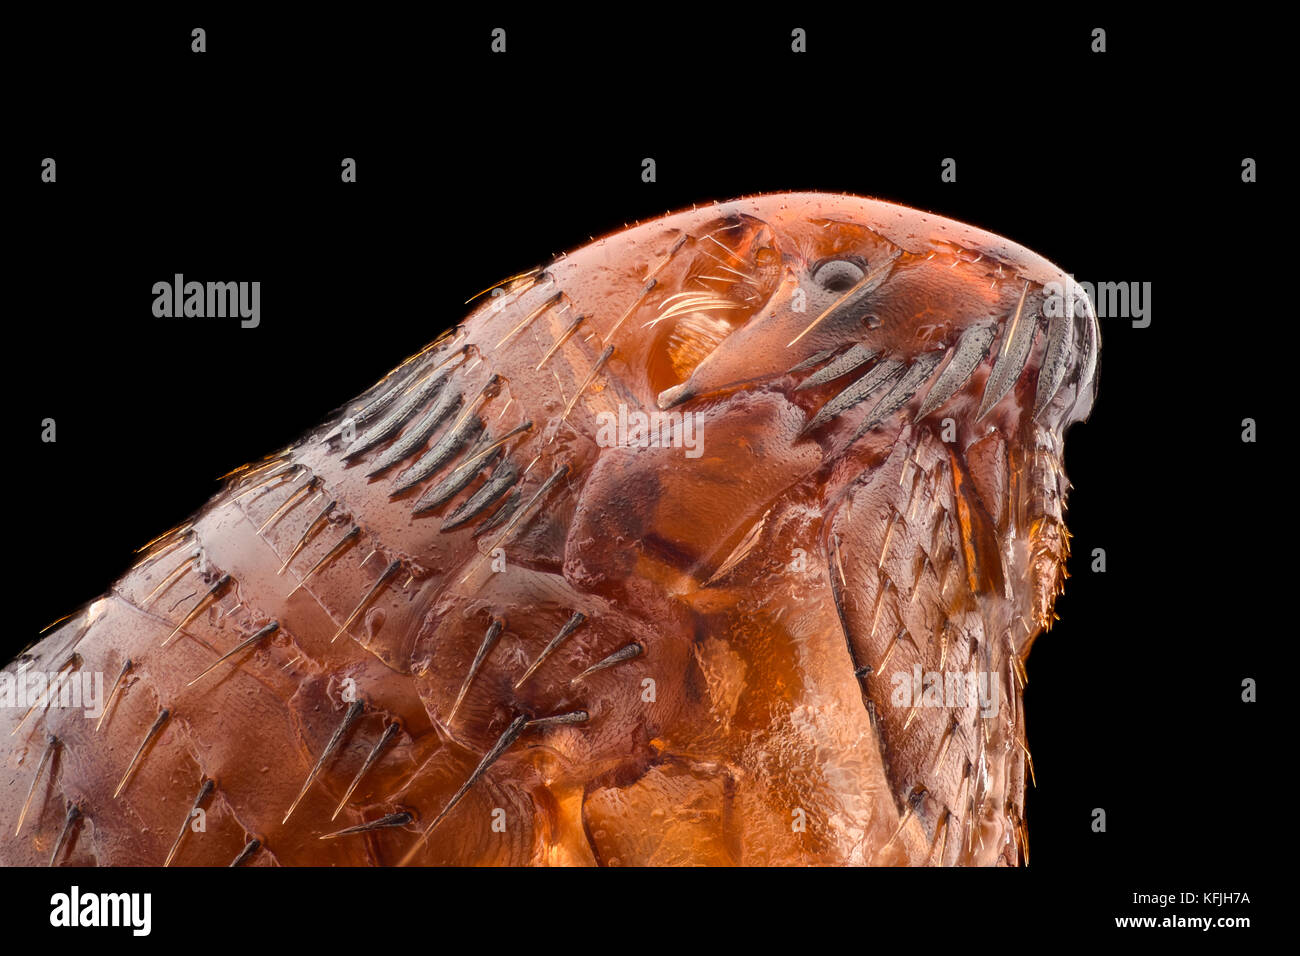 Extreme magnification - Flea under the microscope Stock Photo